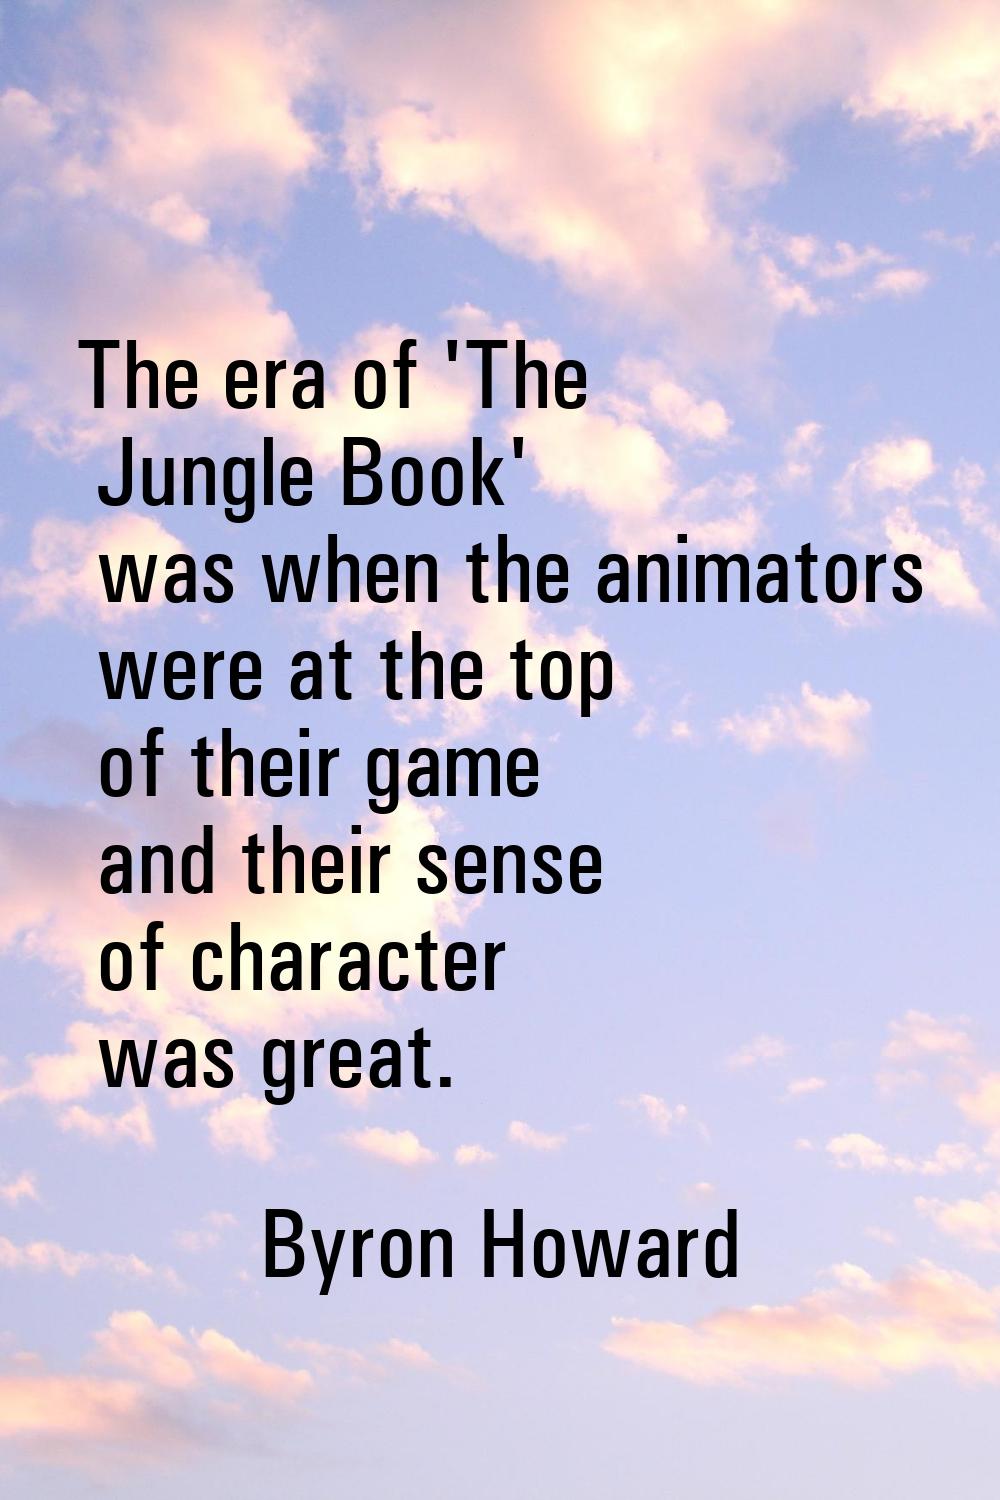 The era of 'The Jungle Book' was when the animators were at the top of their game and their sense o